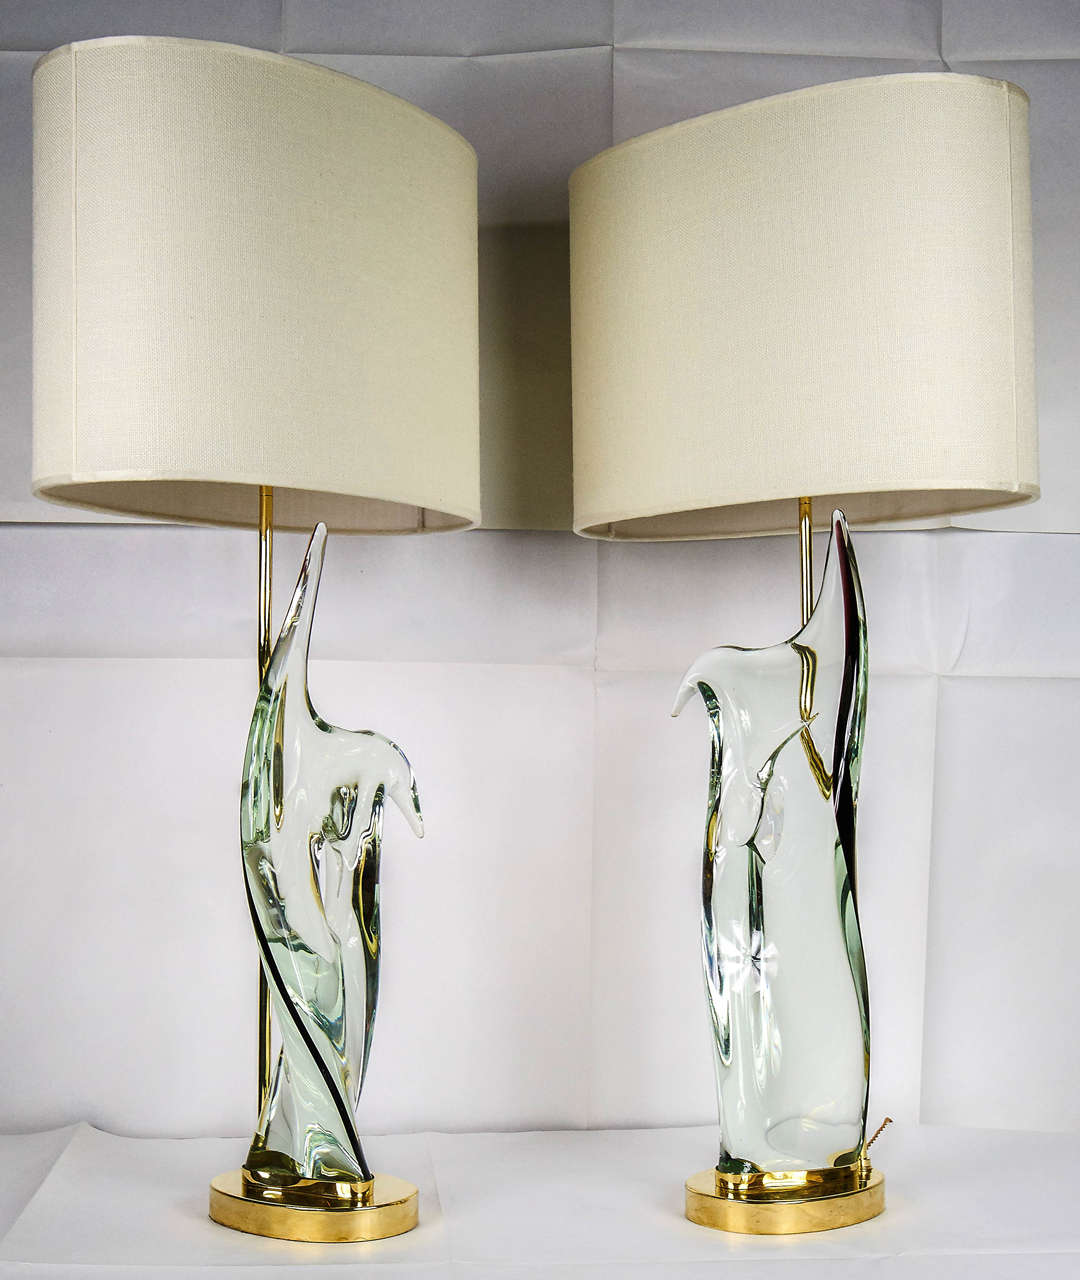 Pair of table lamps, Murano handmade informal sculpture transparent glass with black pasta of glass line on one side.
The informal shape with a hole is really representative of the 1950s.
Brass structure made created individually for each glass